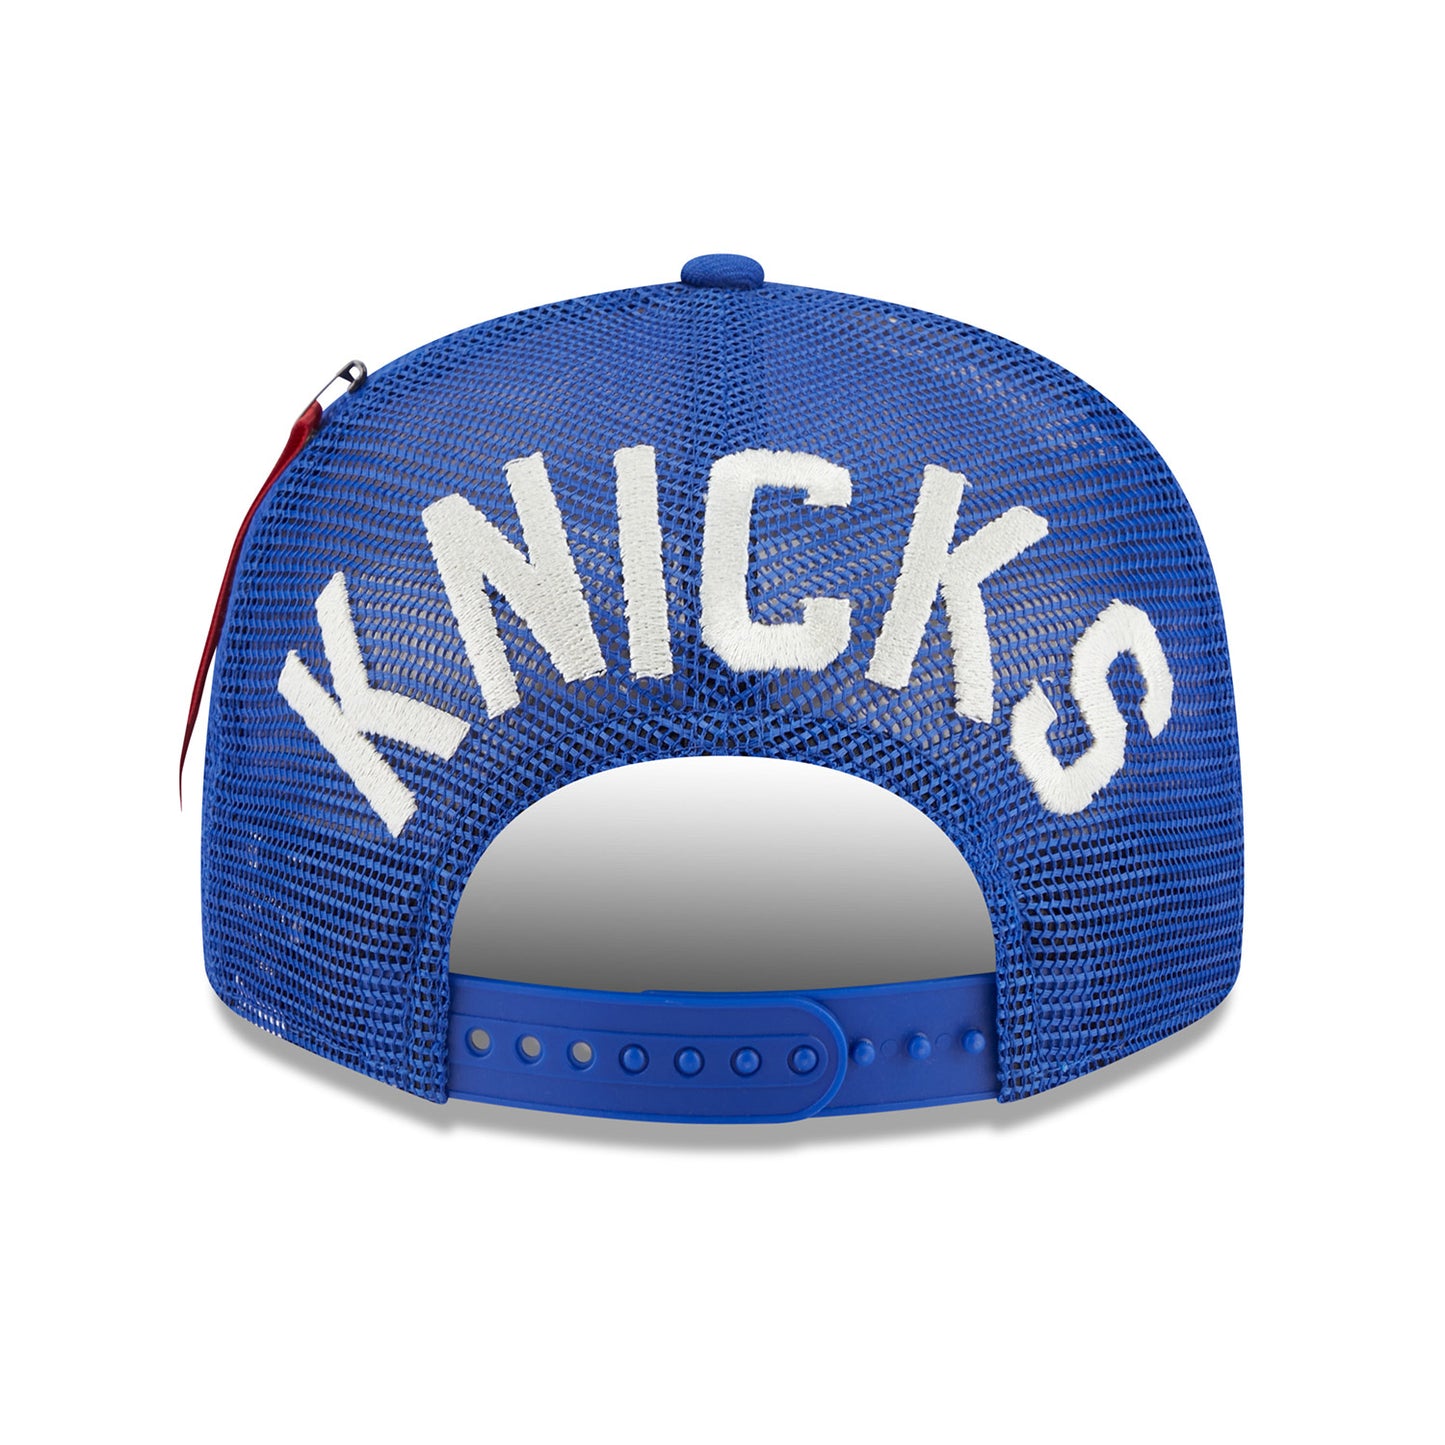 New Era Knicks Alpha Collection Snapback Hat In Blue & White - Back View